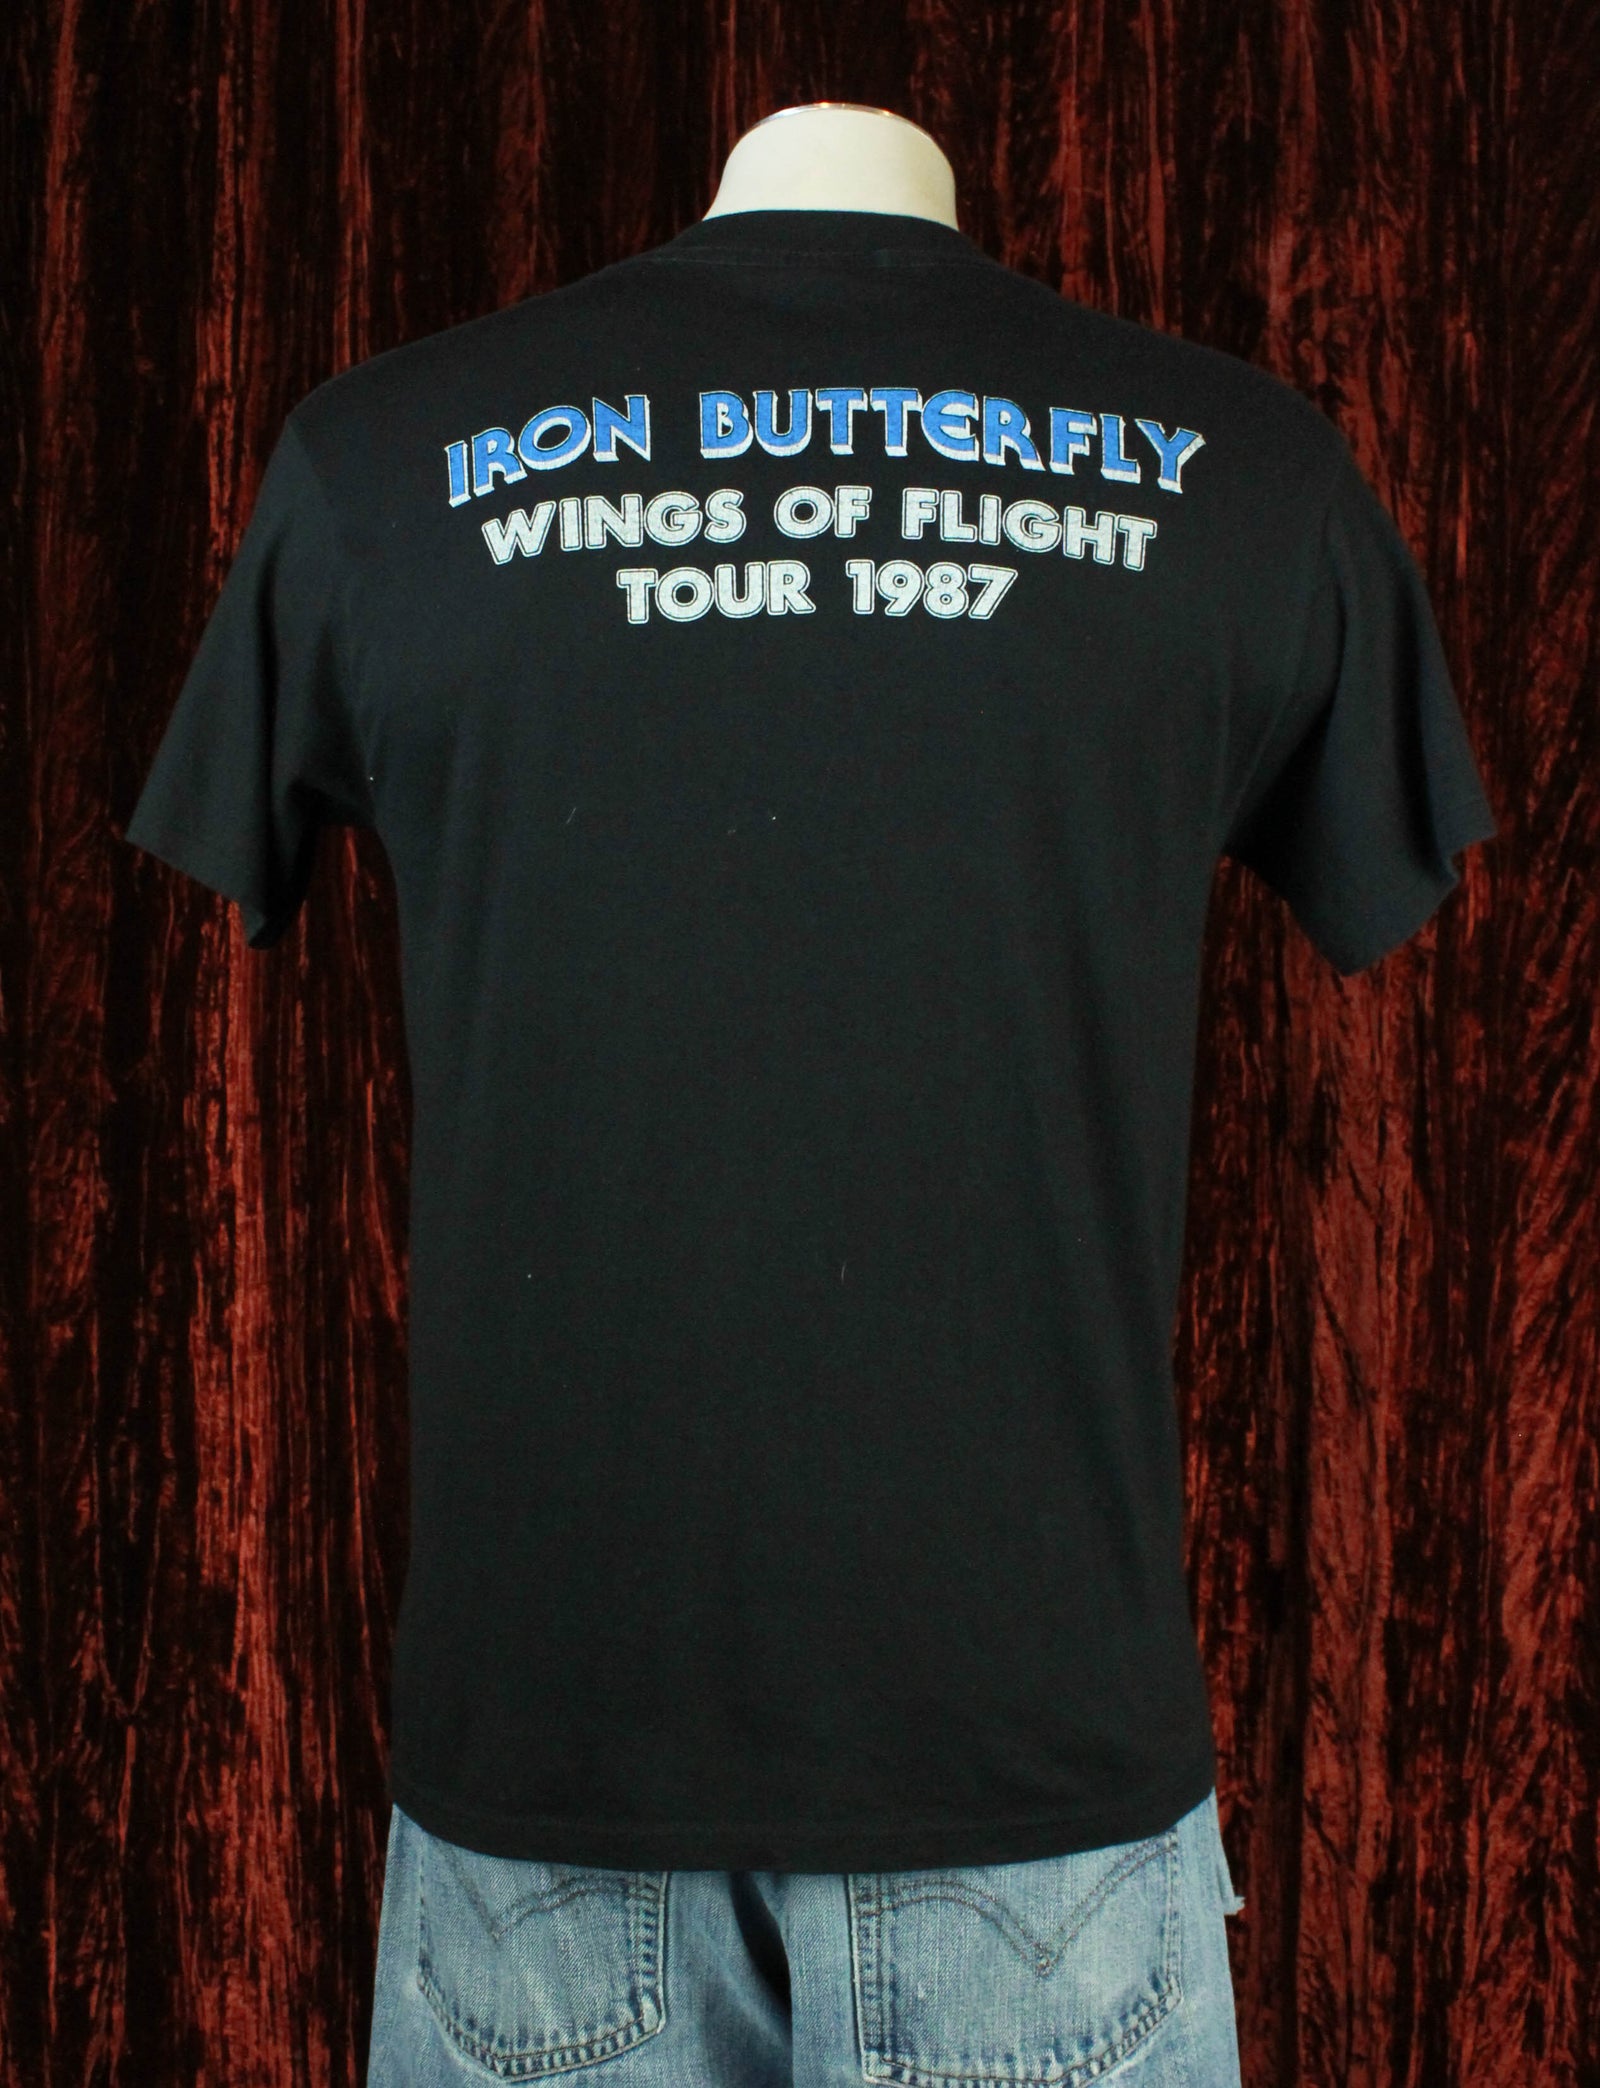 Vintage Iron Butterfly Concert T Shirt 1987 Wings Of Flight Tour